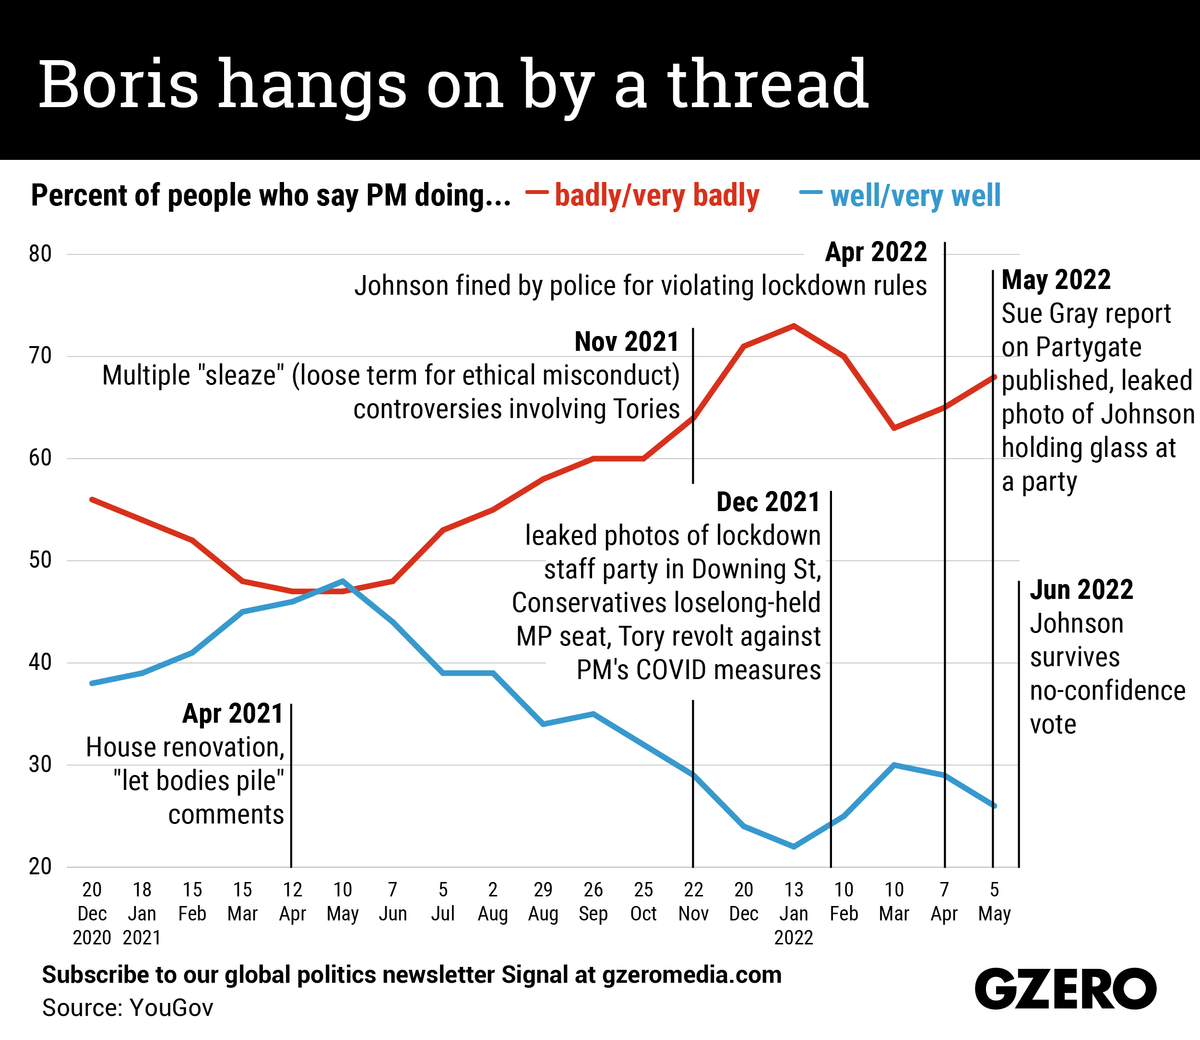 The Graphic Truth: Boris hangs on by a thread